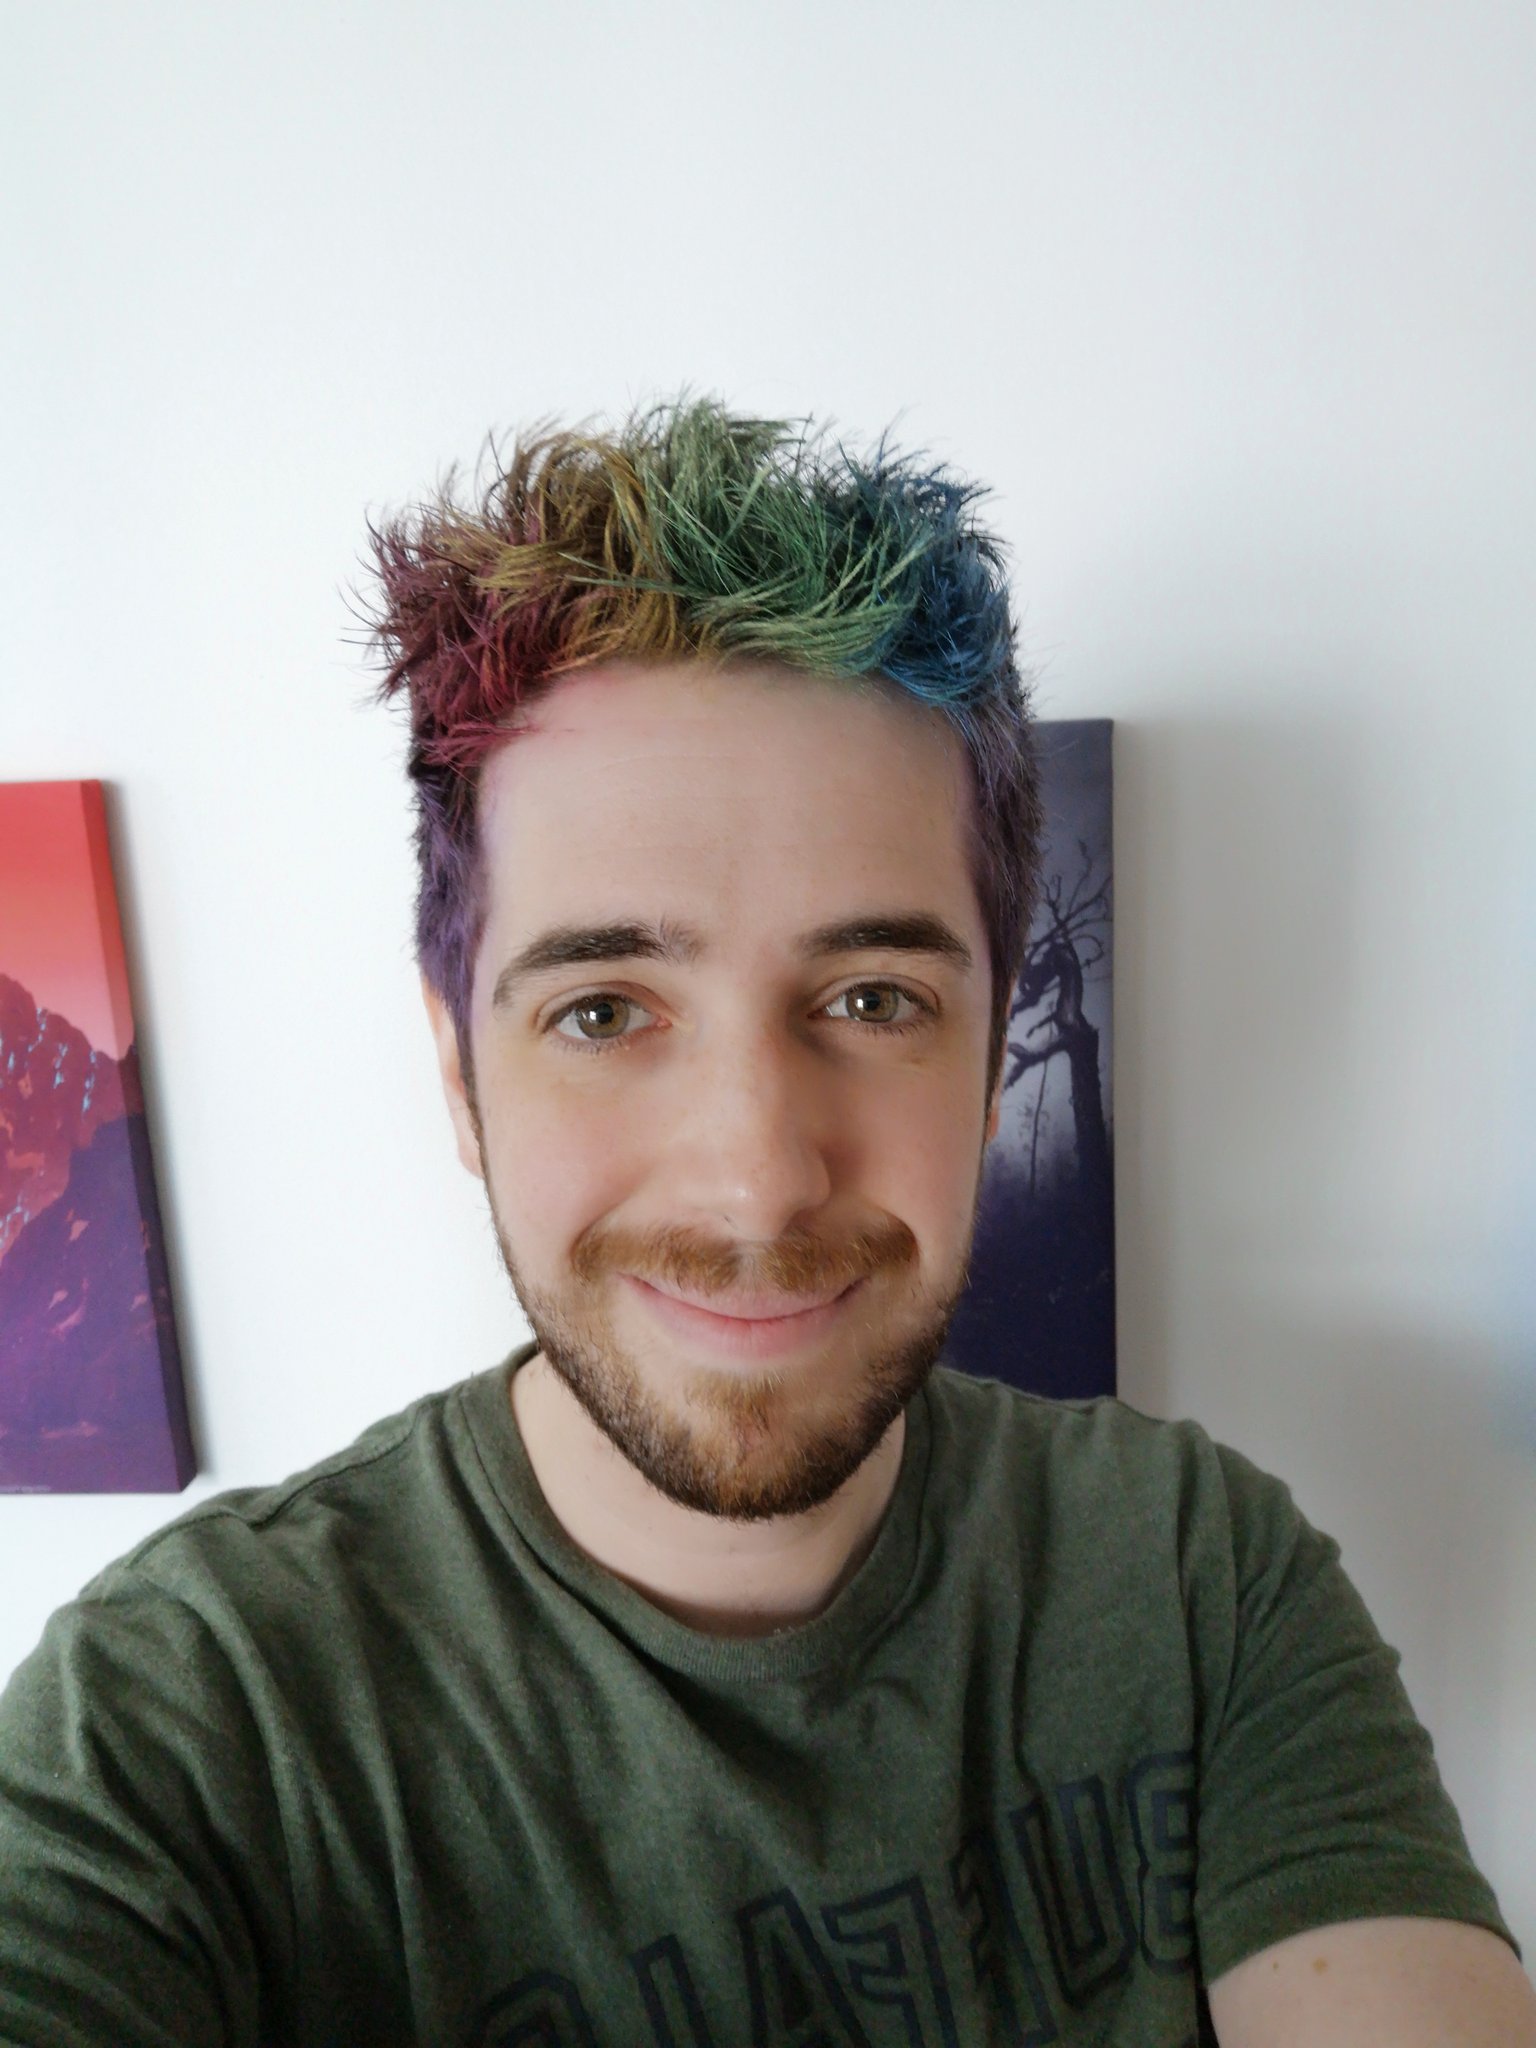 kedel sikring Whitney Tomer Abramovici on Twitter: "Good Morning Gaymers 🌈 Charity Stream for  The Trevor Project begins in 30minutes! https://t.co/ZuukRiwCe9" / Twitter